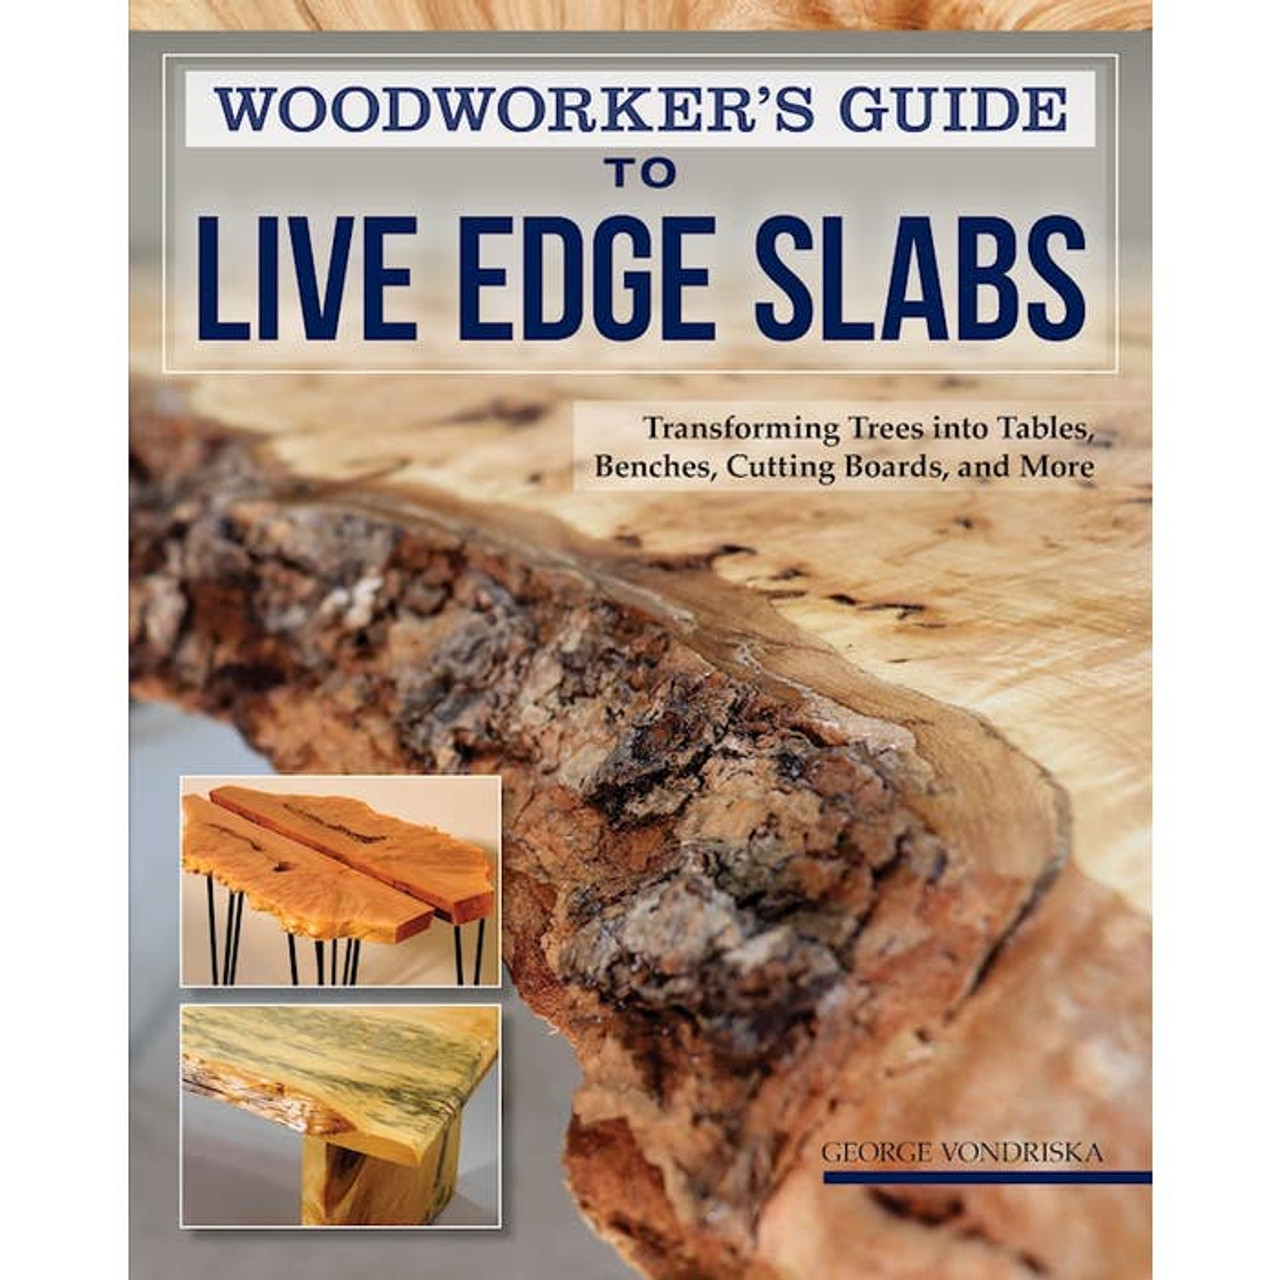 Woodworking Materials, Supplies, and Tools